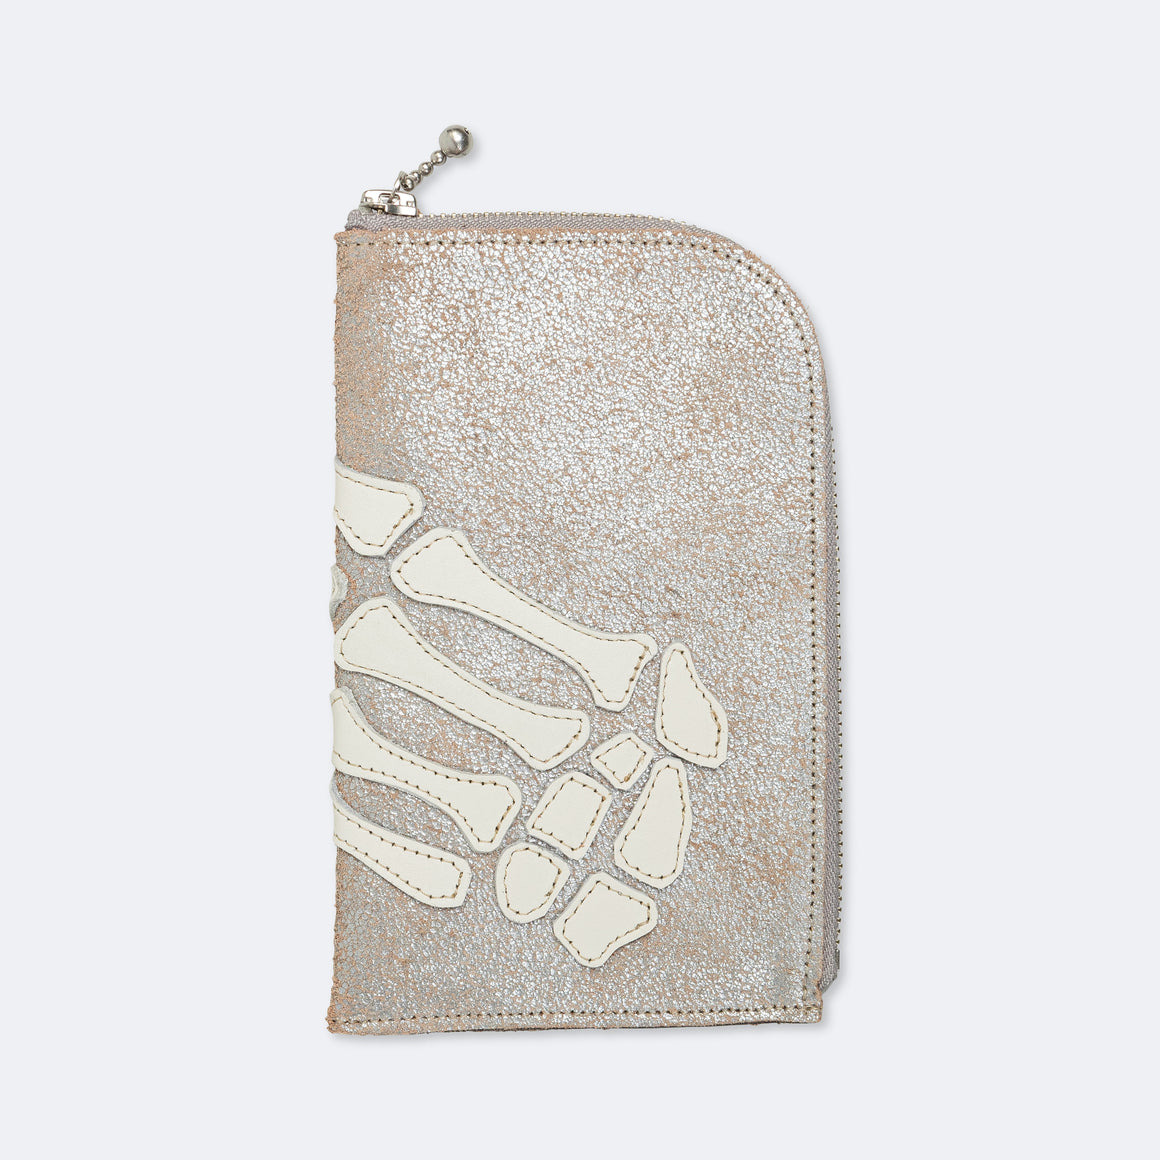 Kapital - Crack Leather THUMBS-UP BONE HAND ZIP Neck Pouch - Silver - UP THERE